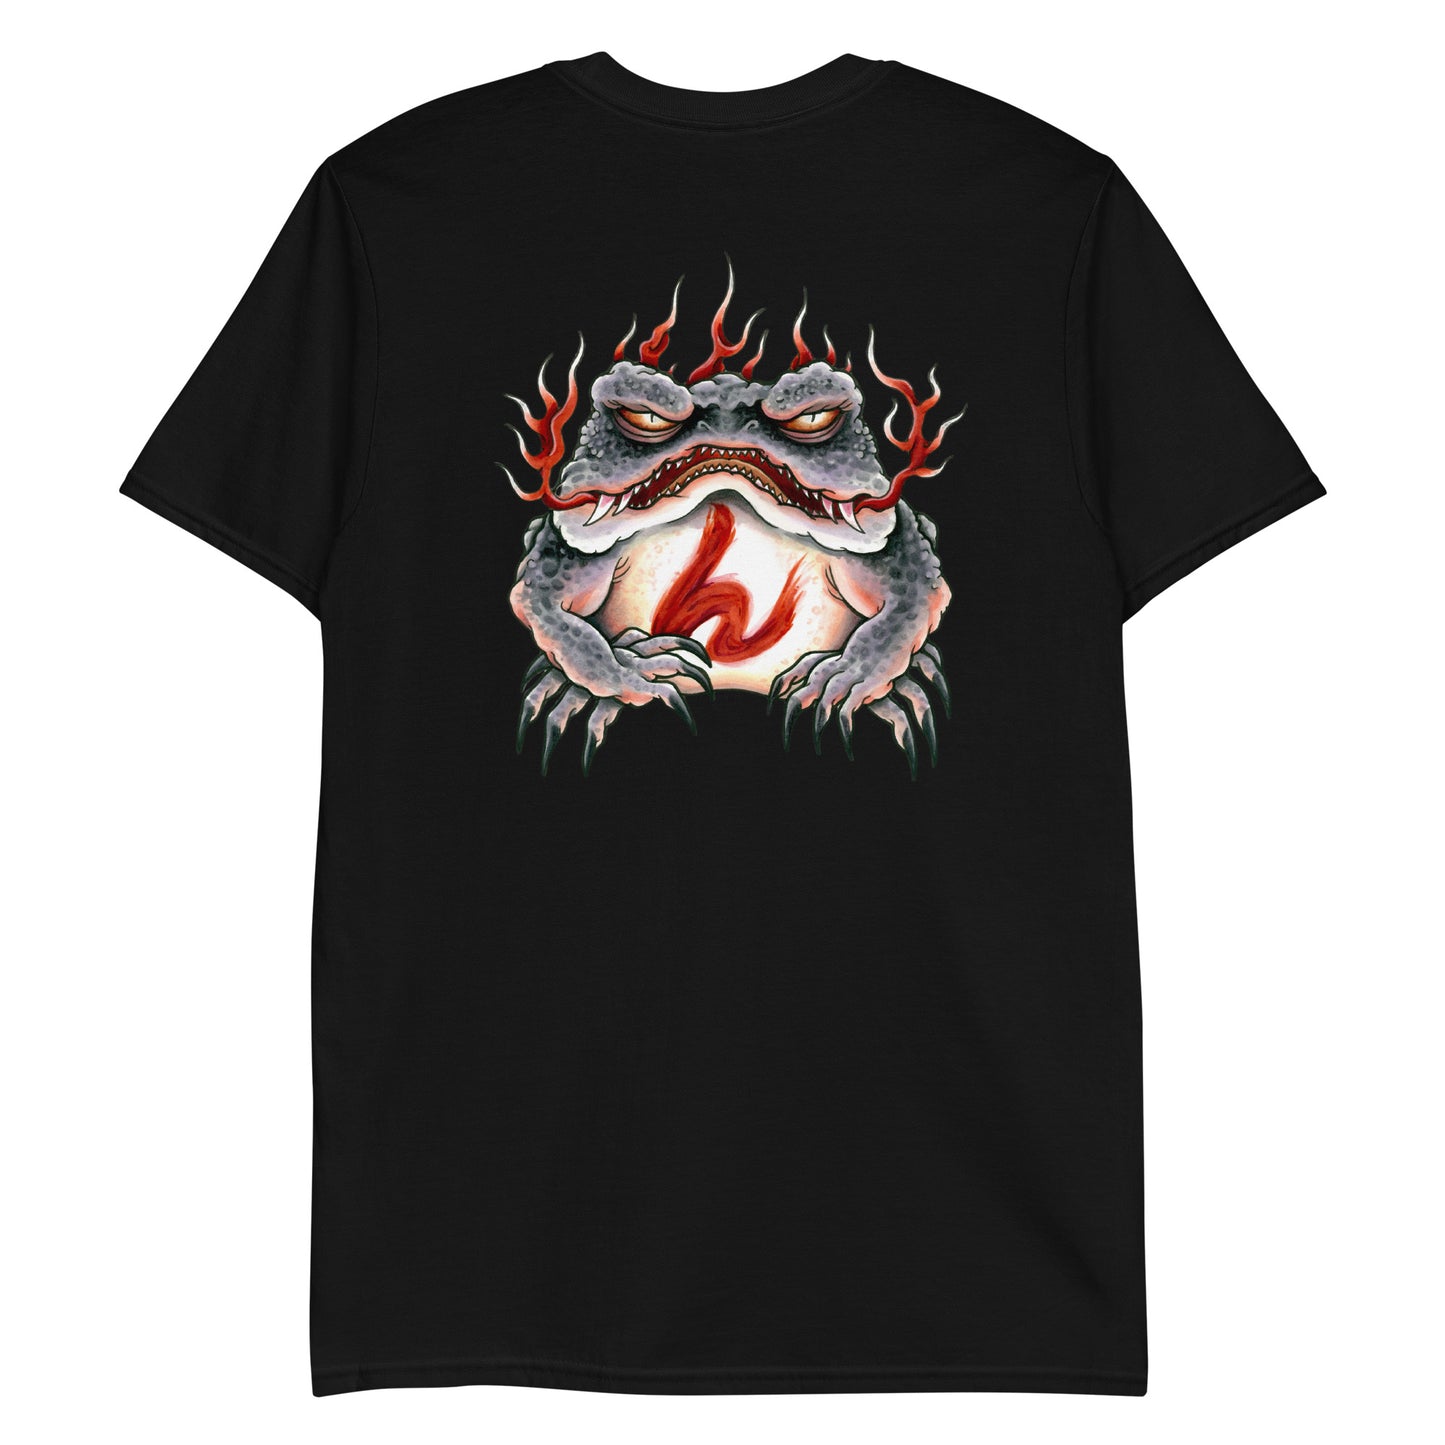 “Fight till you die” - Gaman Toad Short-Sleeve Unisex T-Shirt (black)